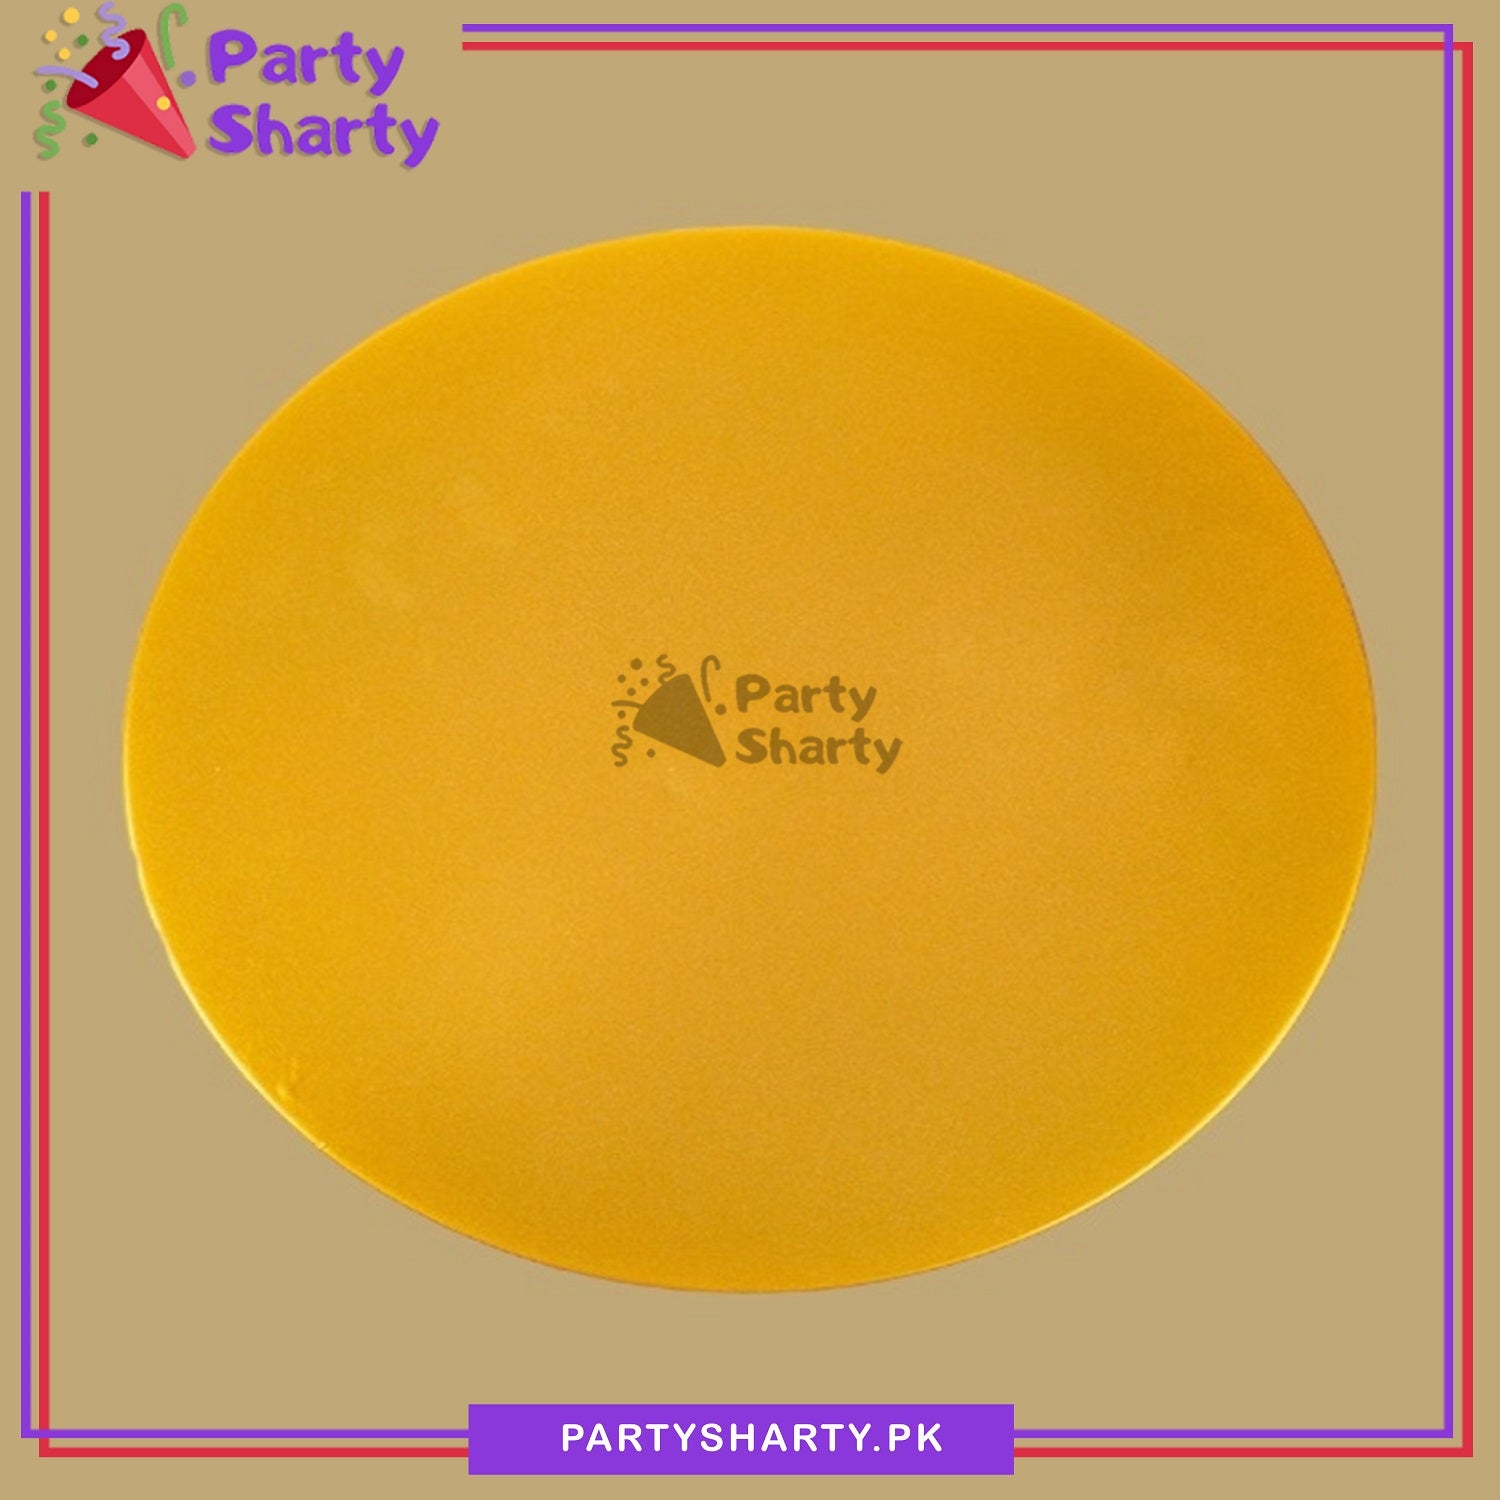 Large Size Golden Metal Round Cake Stand For Party Celebration and Decoration